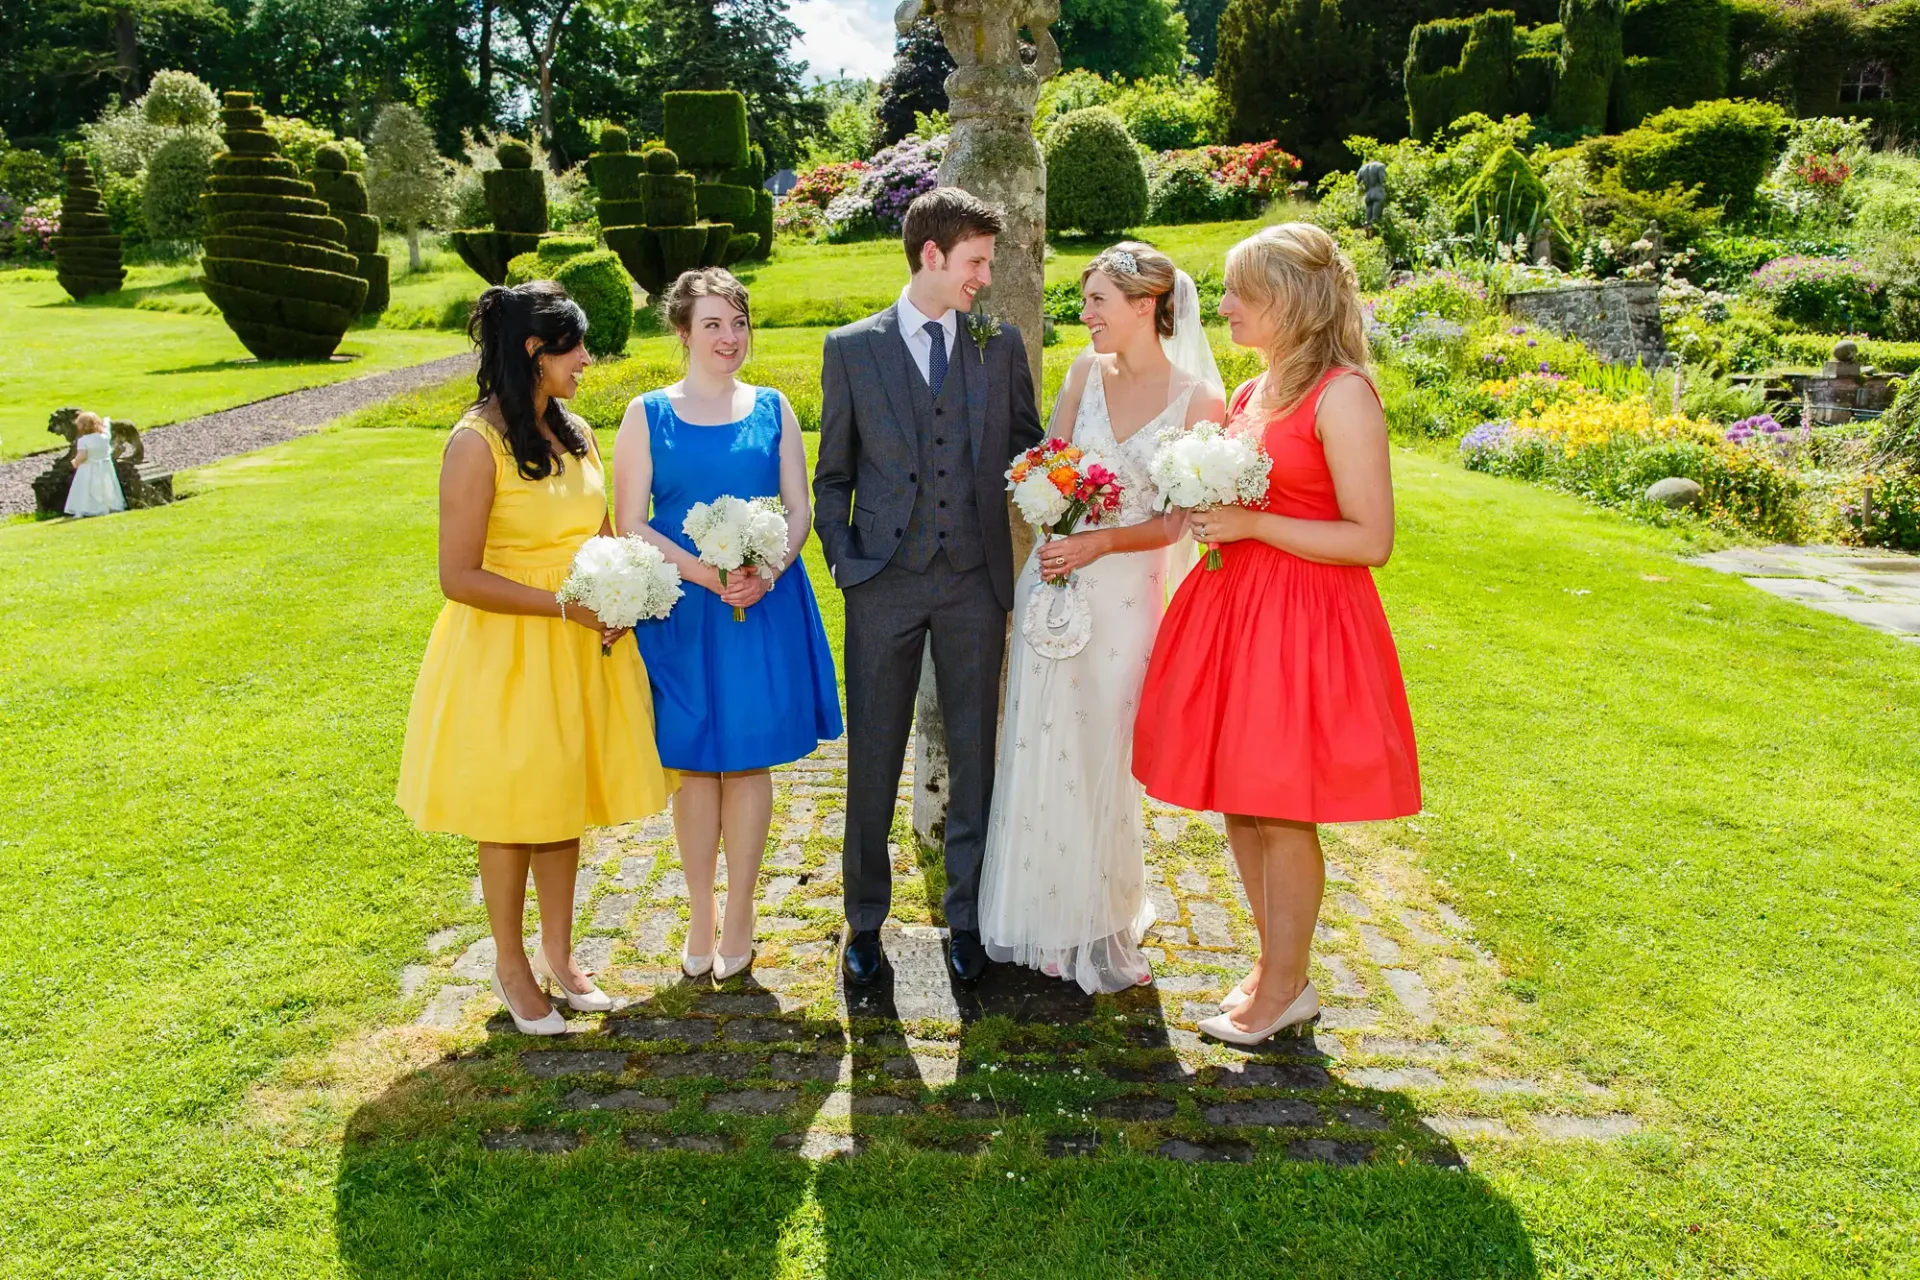 A wedding couple and three bridesmaids, dressed in colorful dresses, standing in a lush garden under bright sunlight.